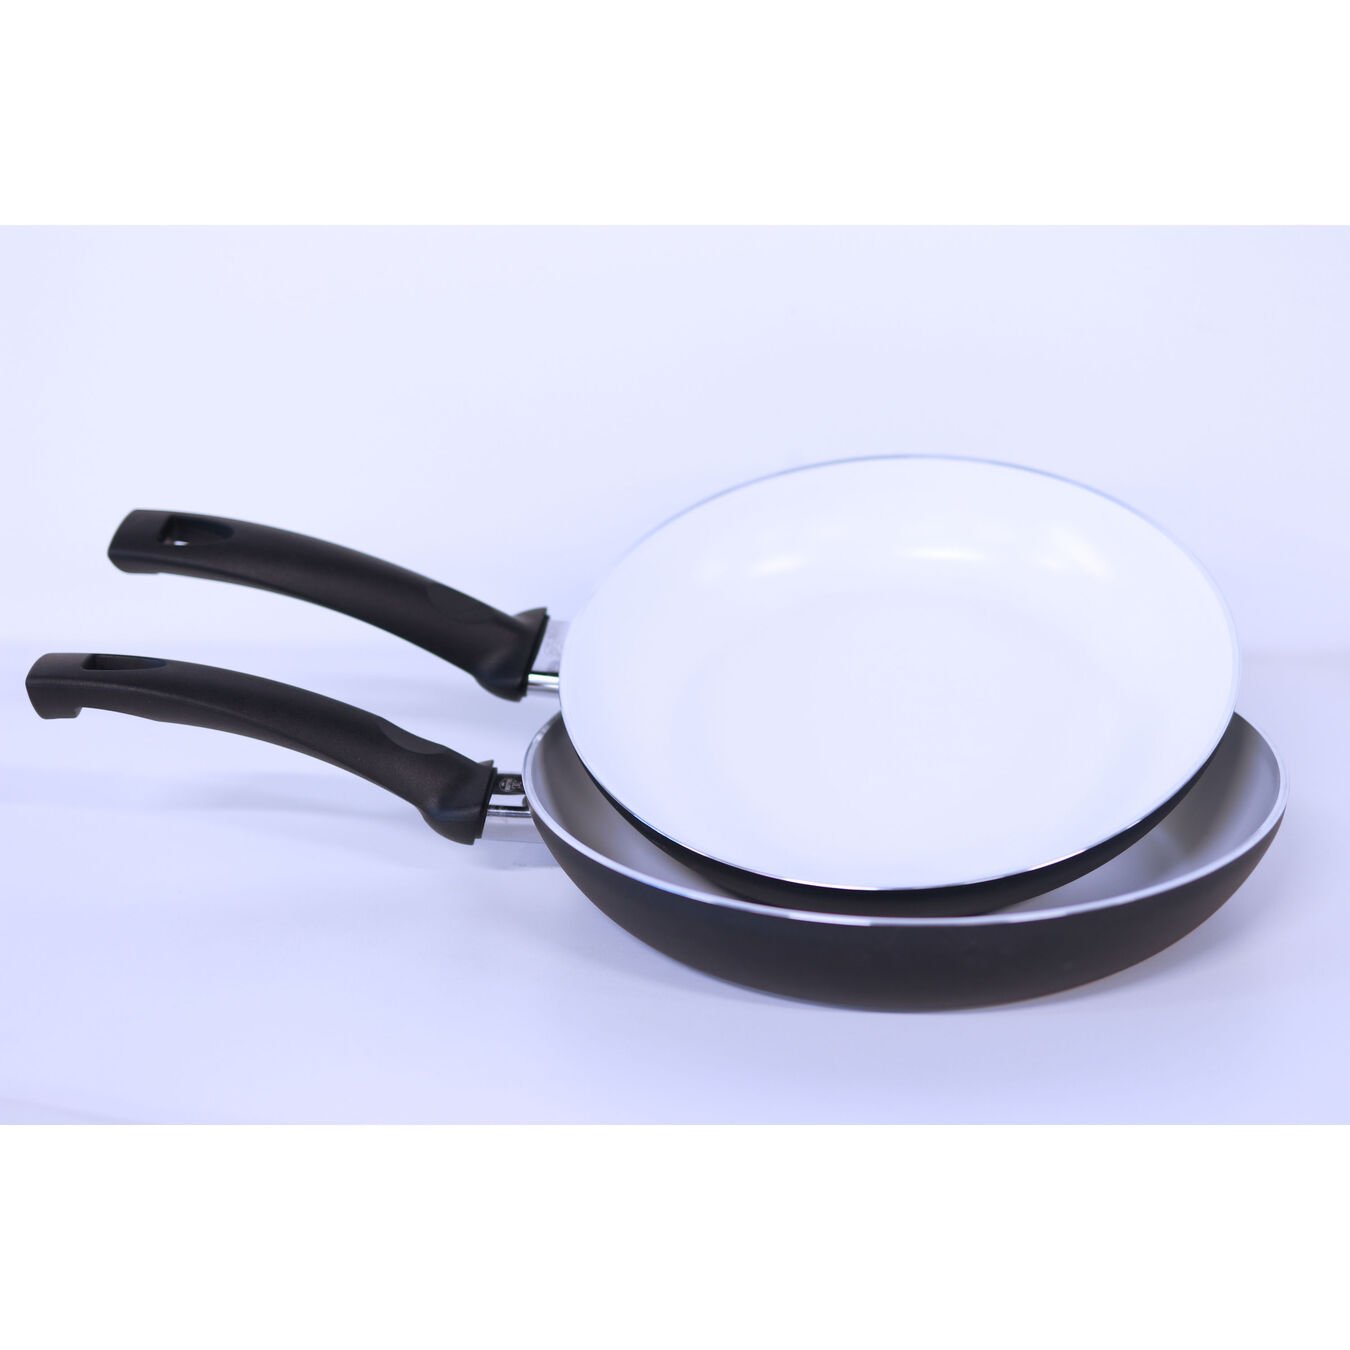 Ballarini Cookware: 2-Piece Iseo Frying Pan Set $9, 5.25-Qt Stew Pot $10, More + Free Shipping on $59+